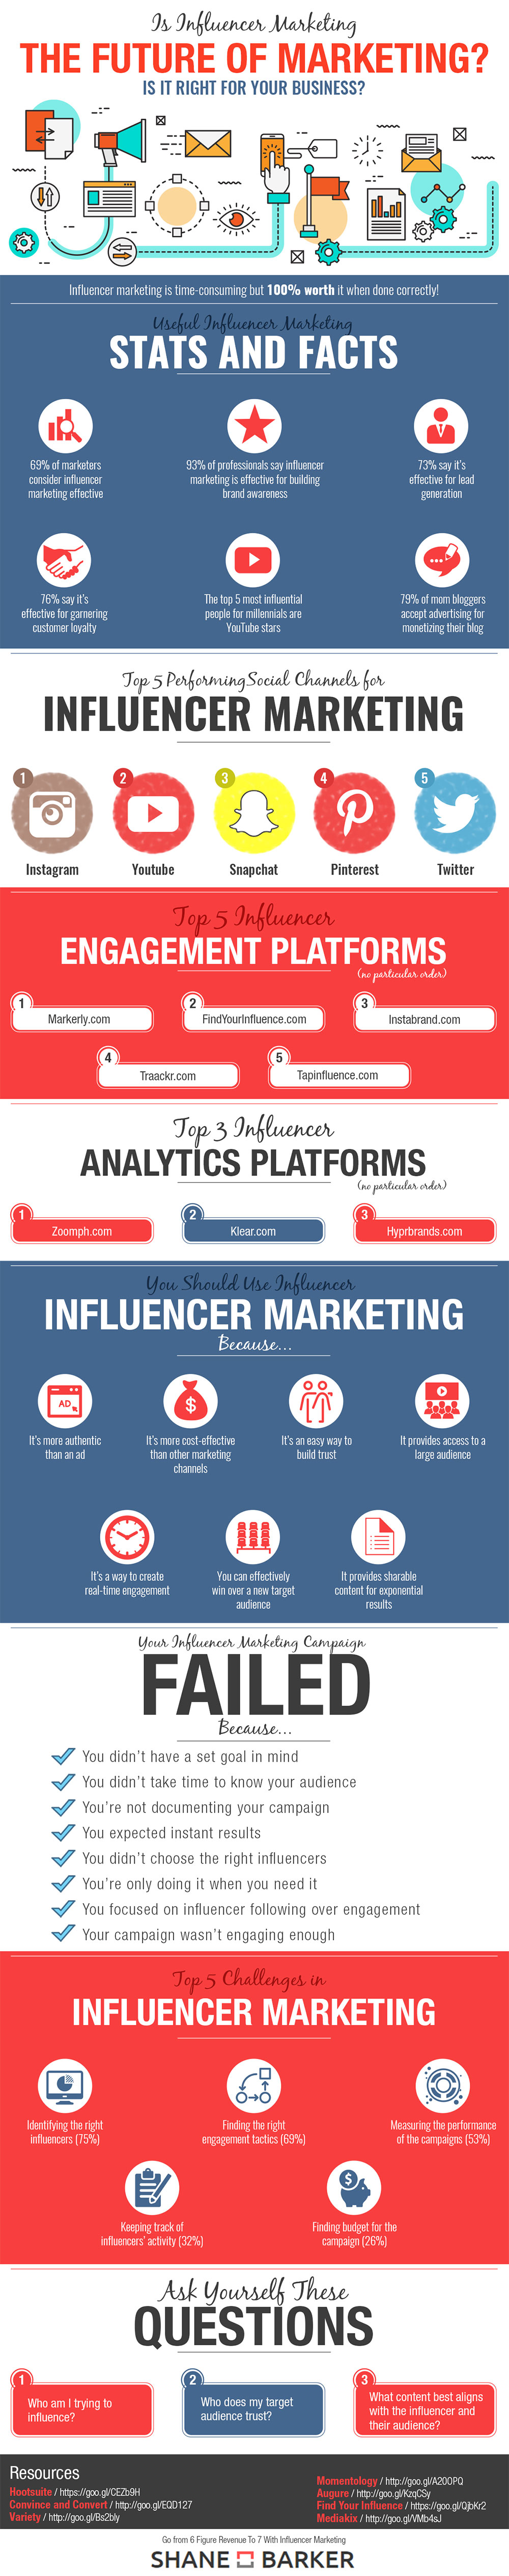 Is-Influencer-Marketing-the-Future-of-Marketing-IG